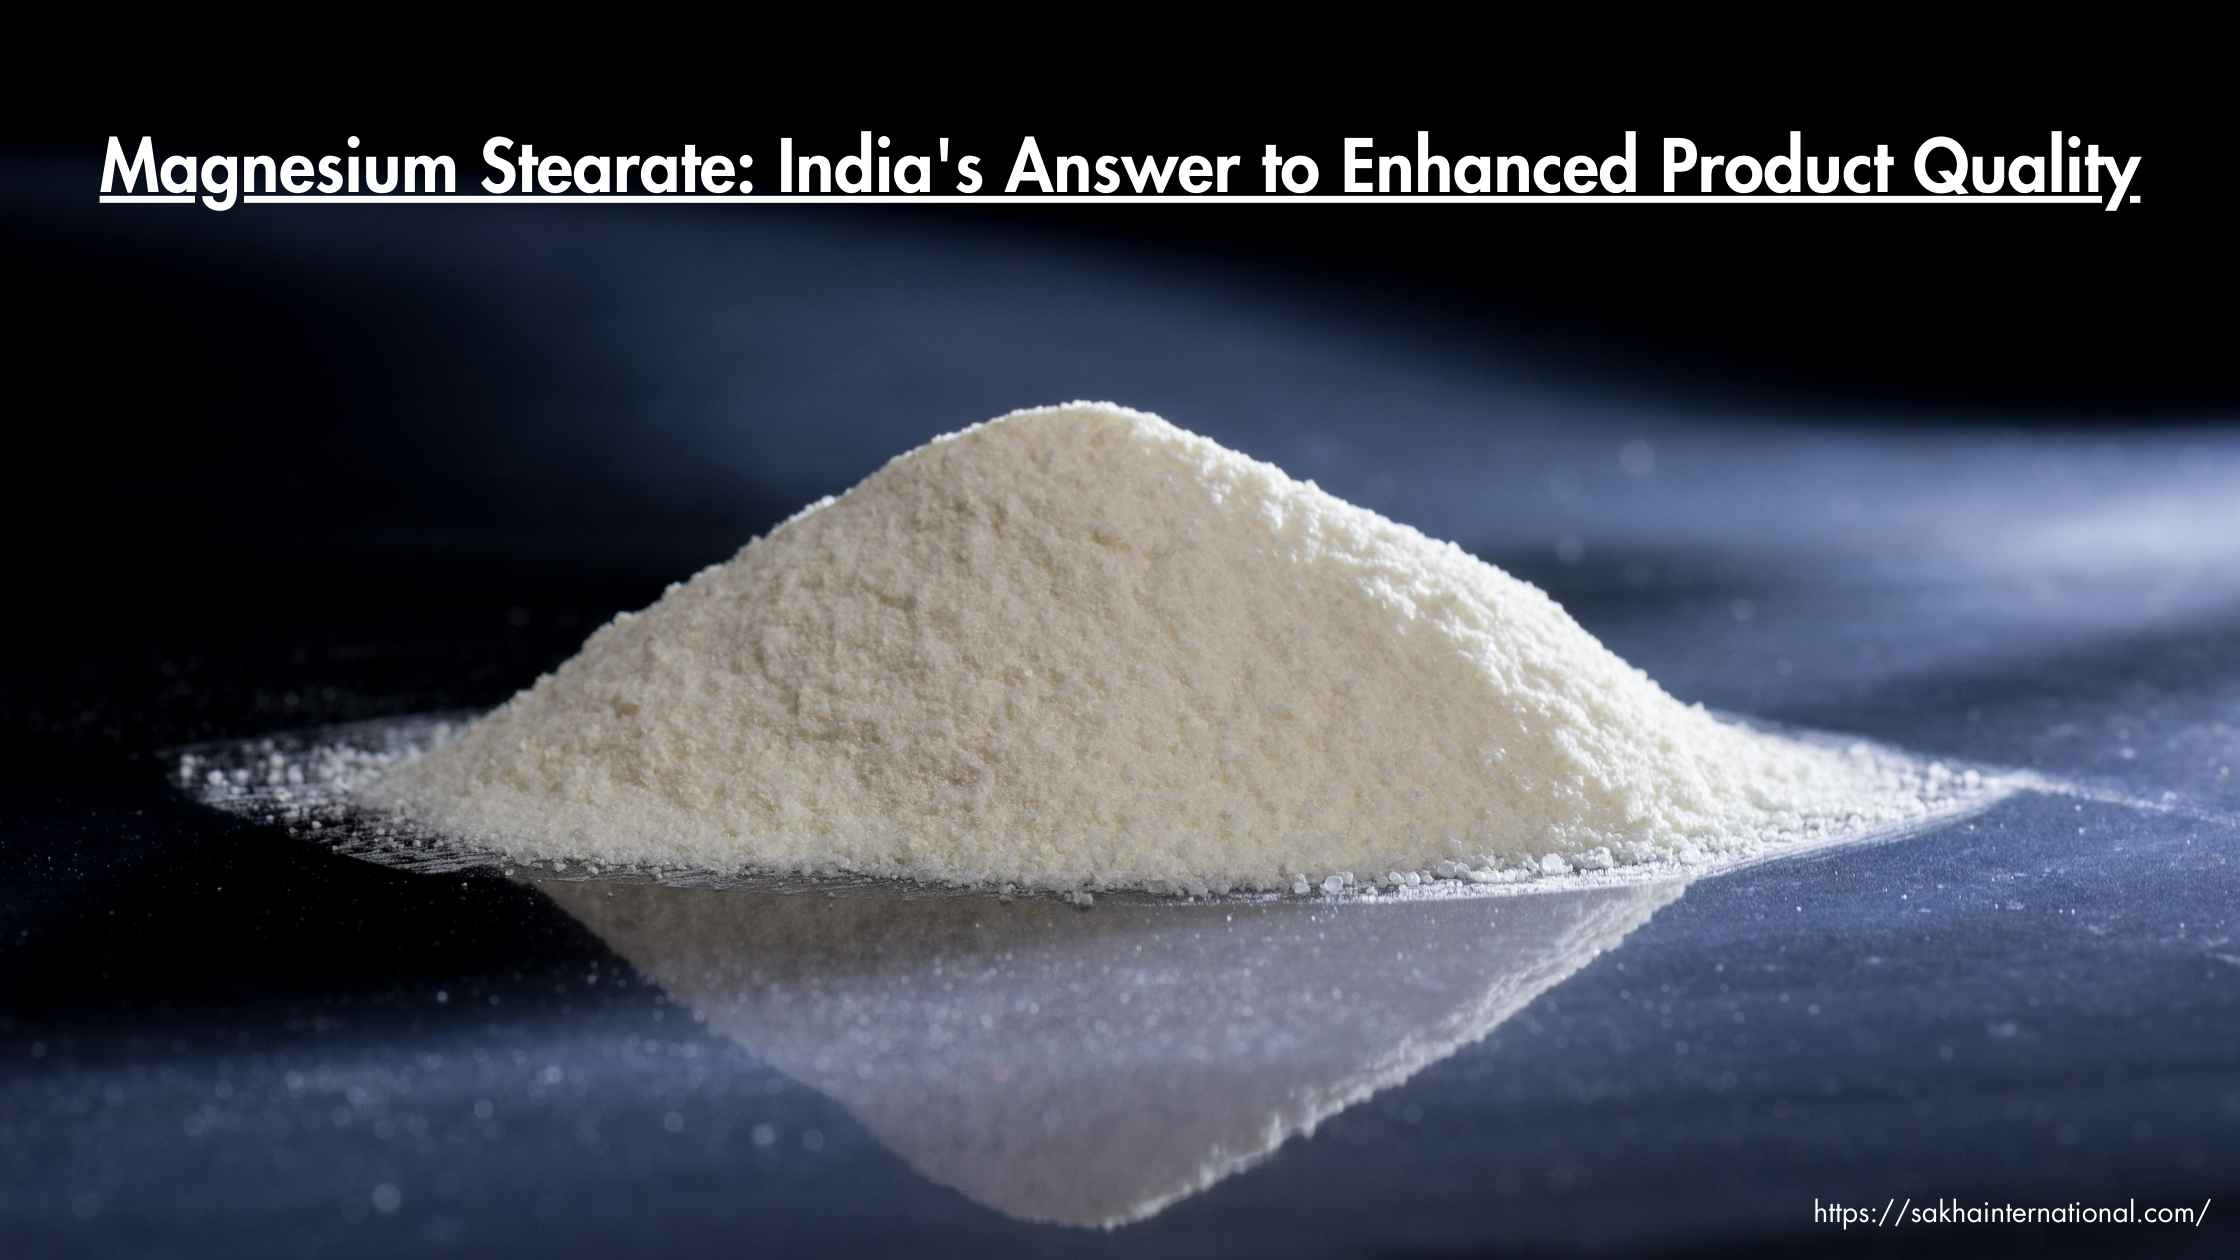 Magnesium Stearate: India's Answer to Enhanced Product Quality